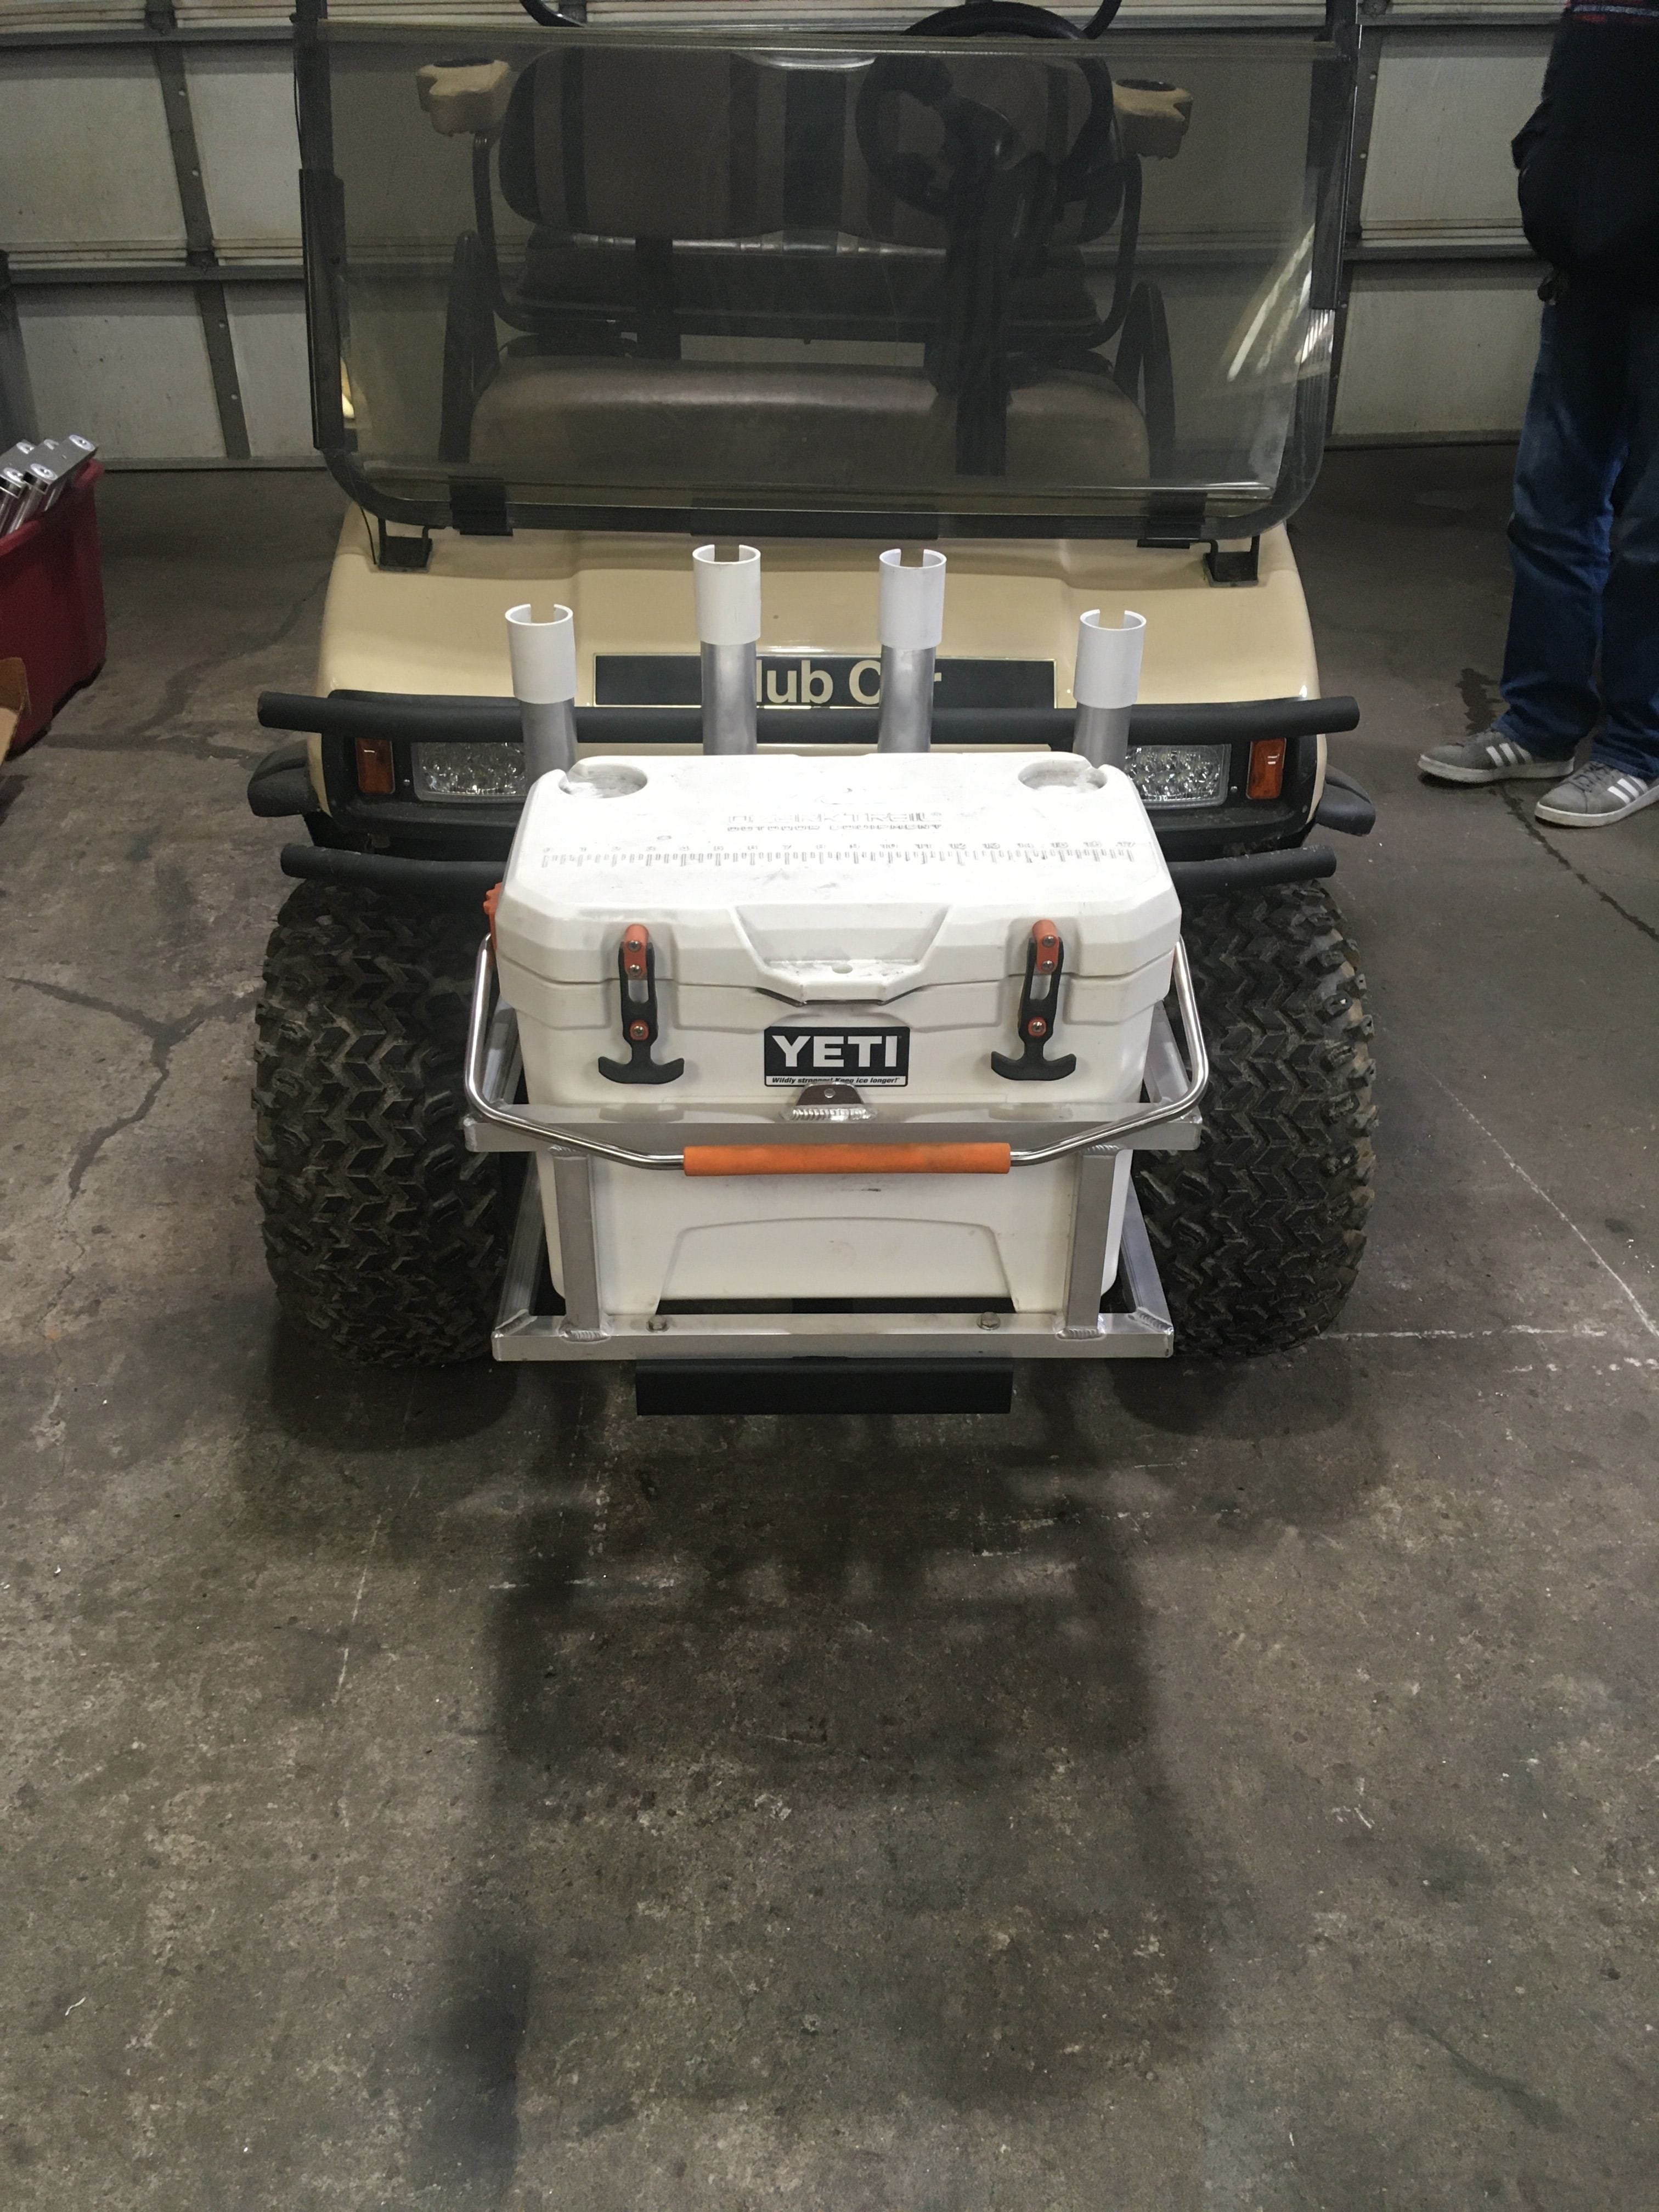 Custom fabricated cooler racks are built for your golf cart.